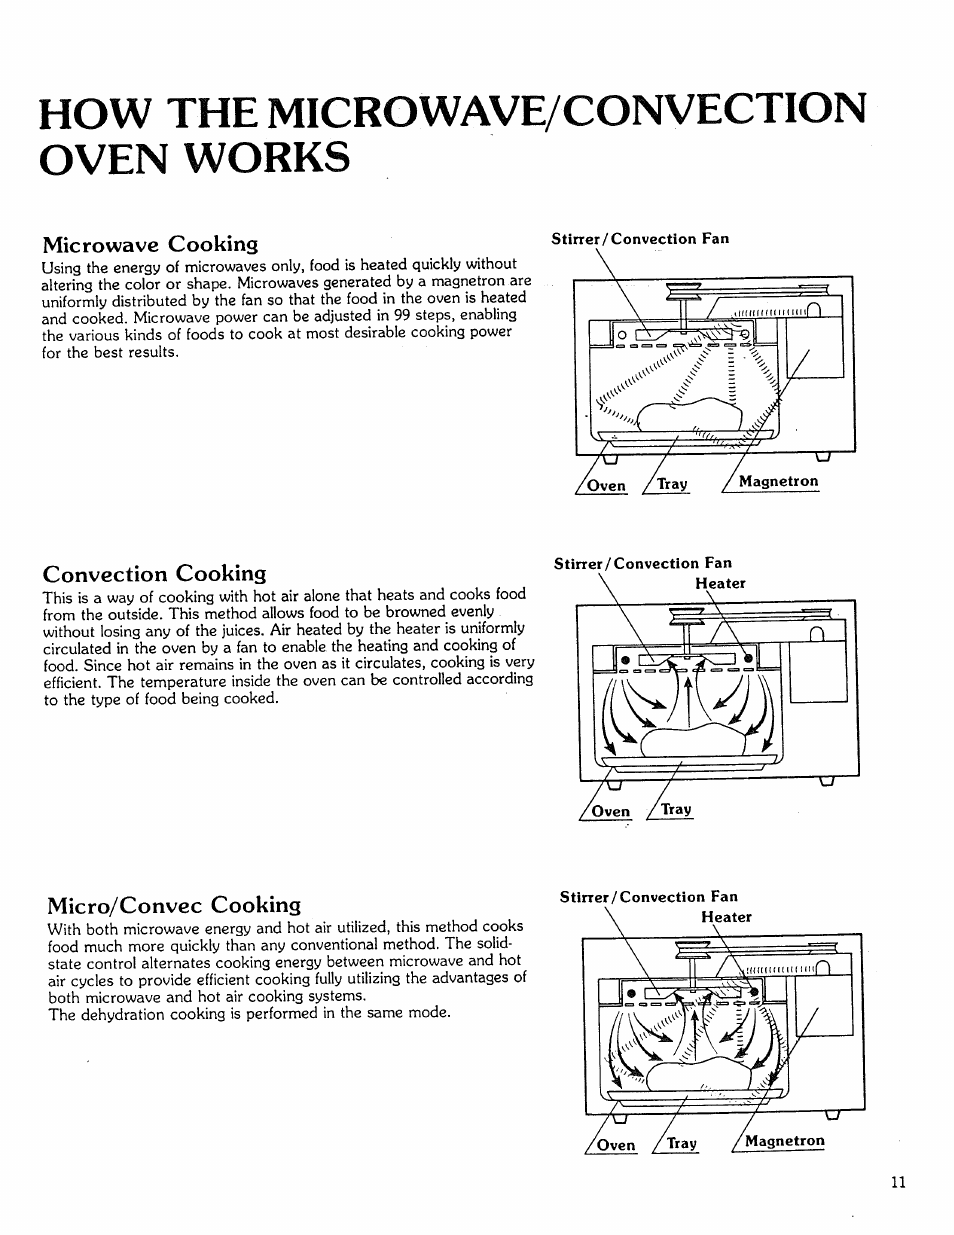 How the microwave/convection oven works, Microwave cooking, Convection